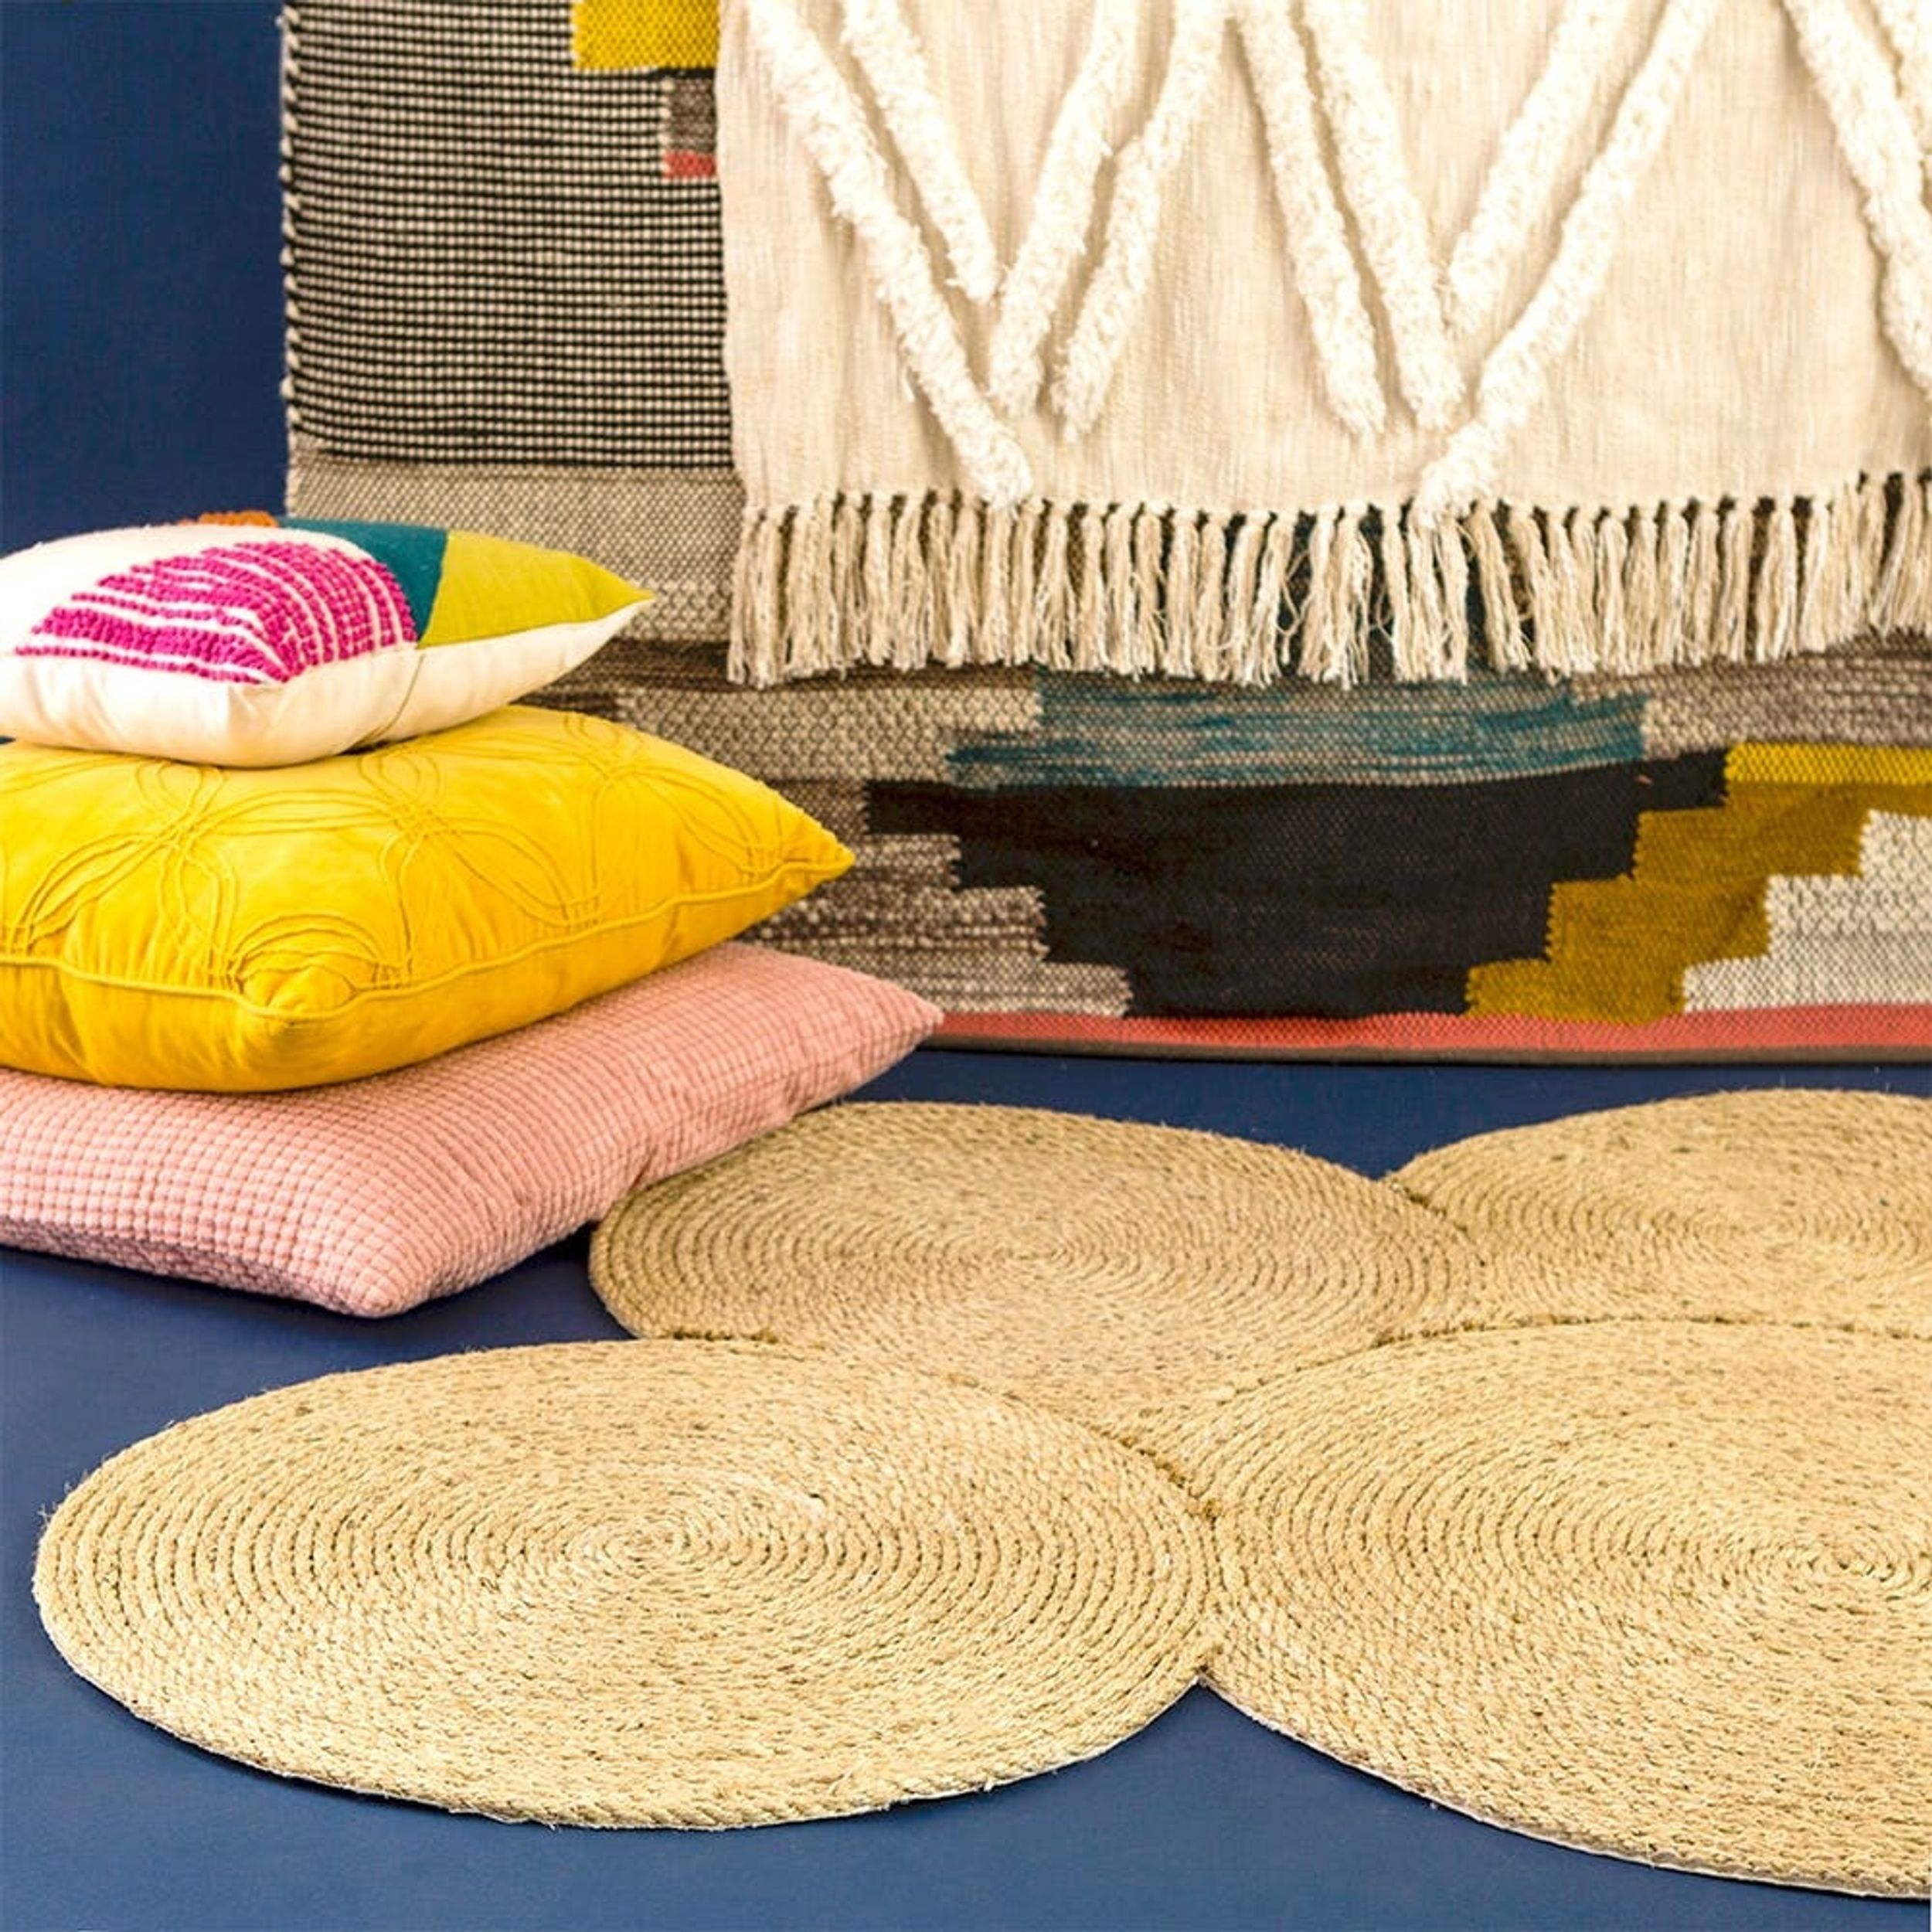 Make This Rope Rug With Only Three Materials